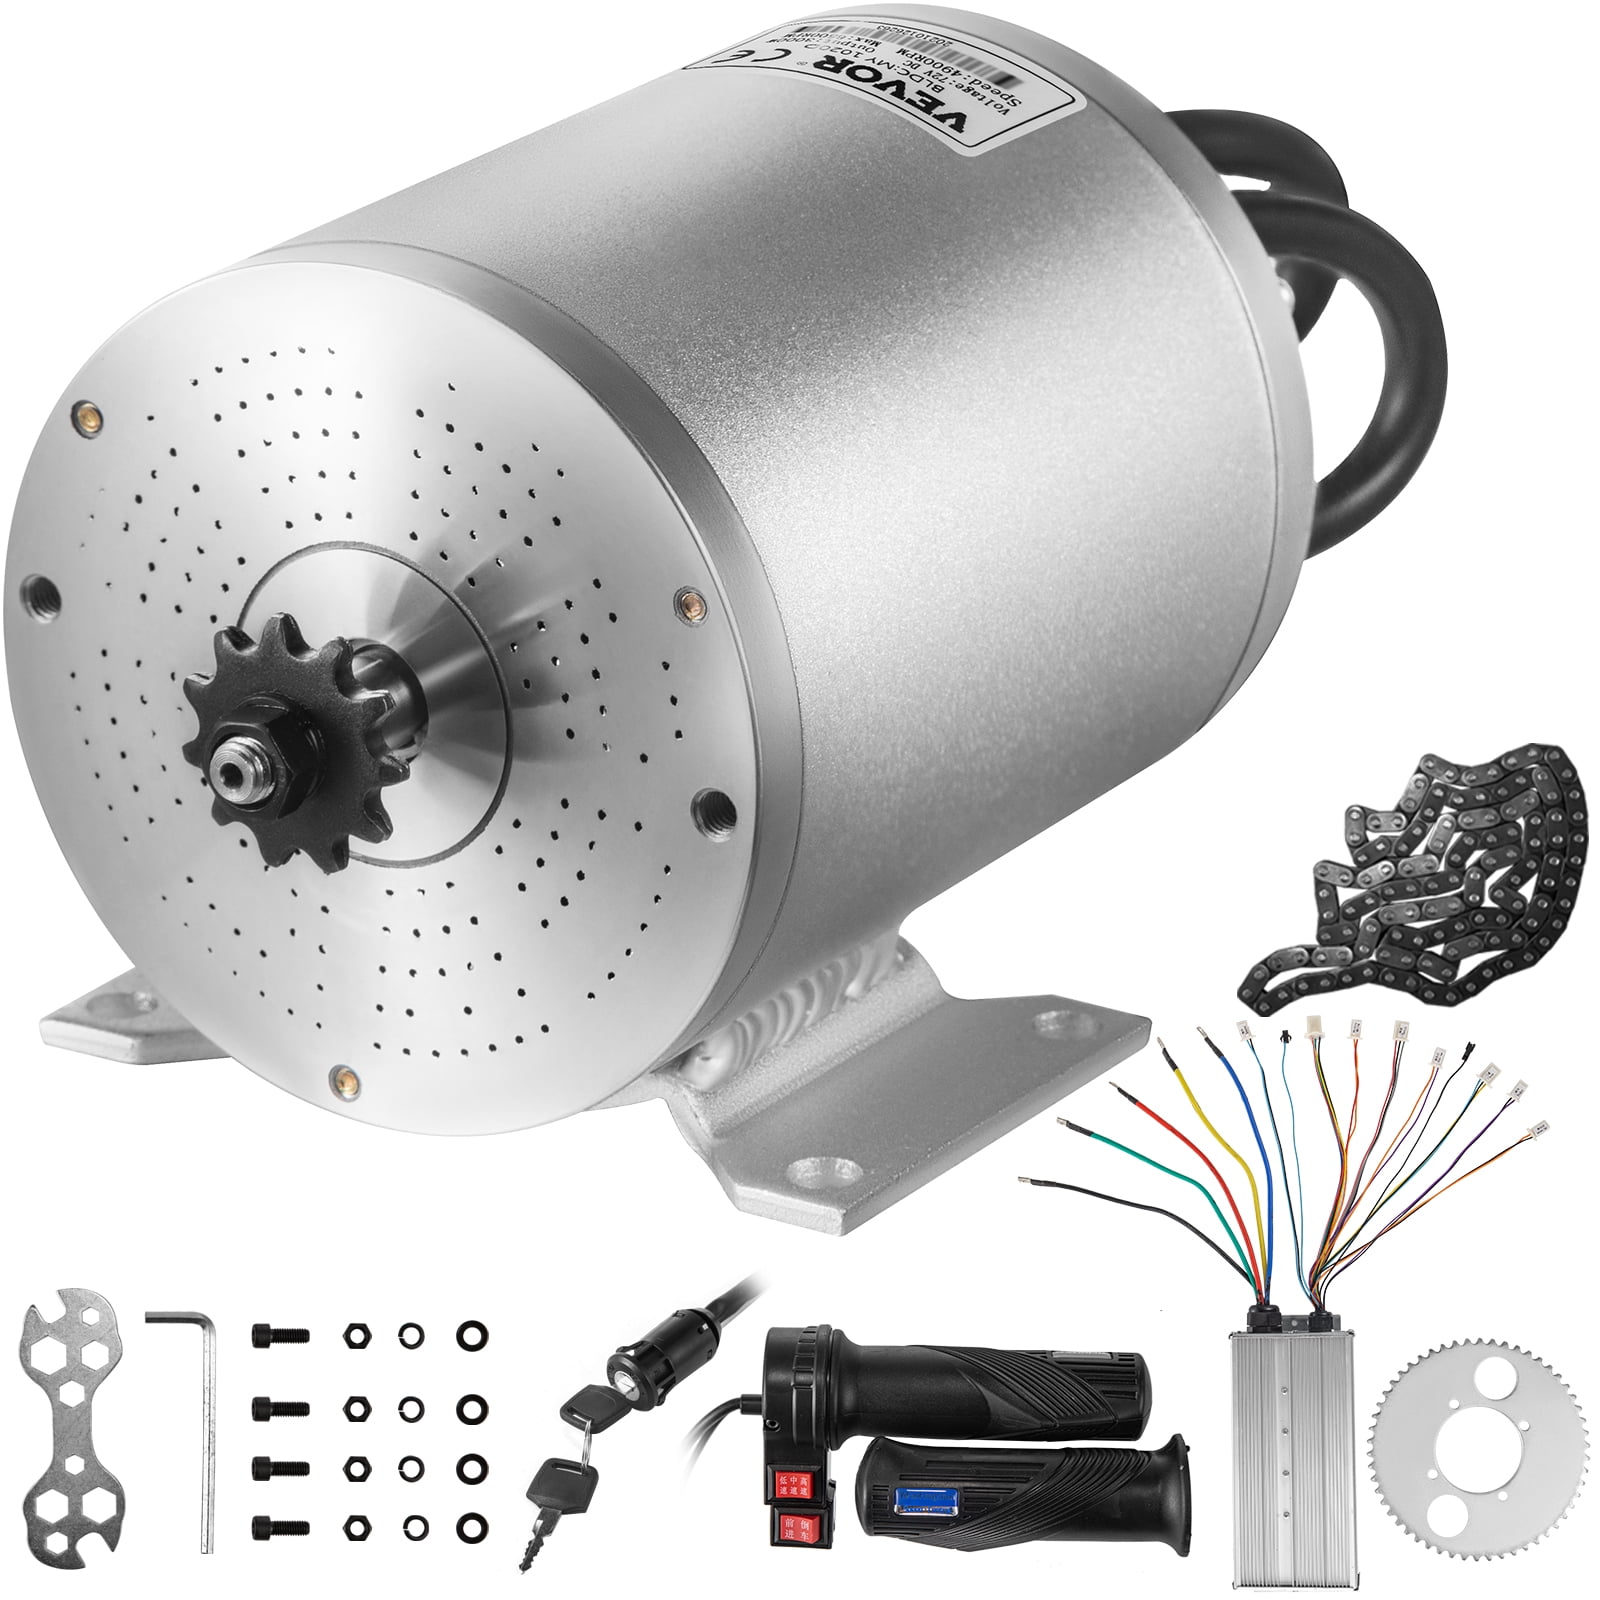 Electric Brushless Motor 2000W 60V DC For E-bike Scooter Bicycle Conversion 